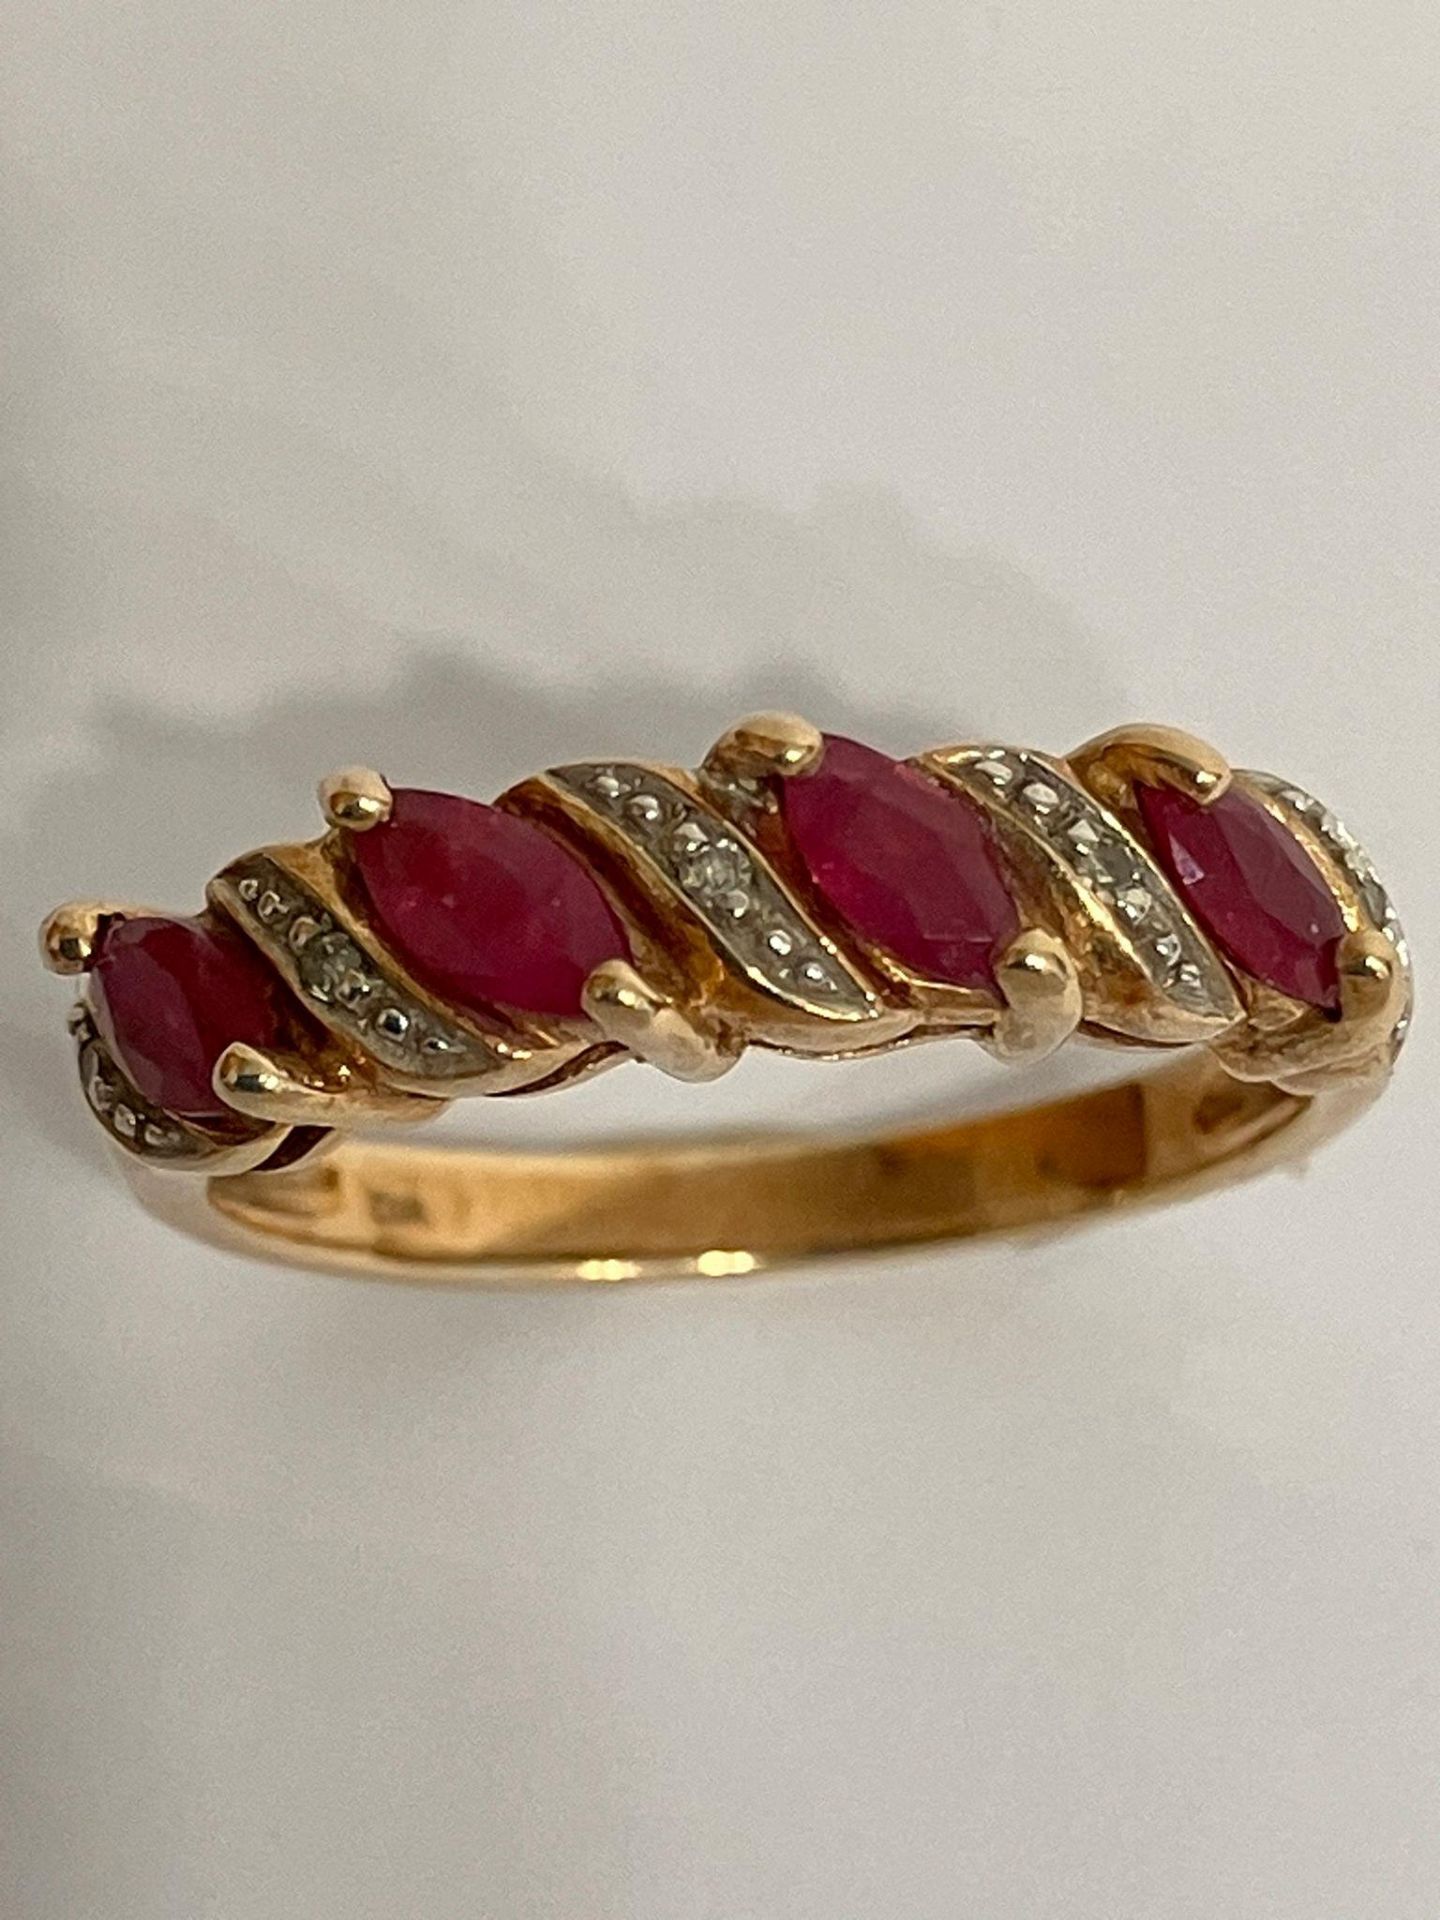 Classic 9 carat GOLD RUBY and DIAMOND RING. having Rubies and Diamonds sweep mounted. Full UK - Image 3 of 3